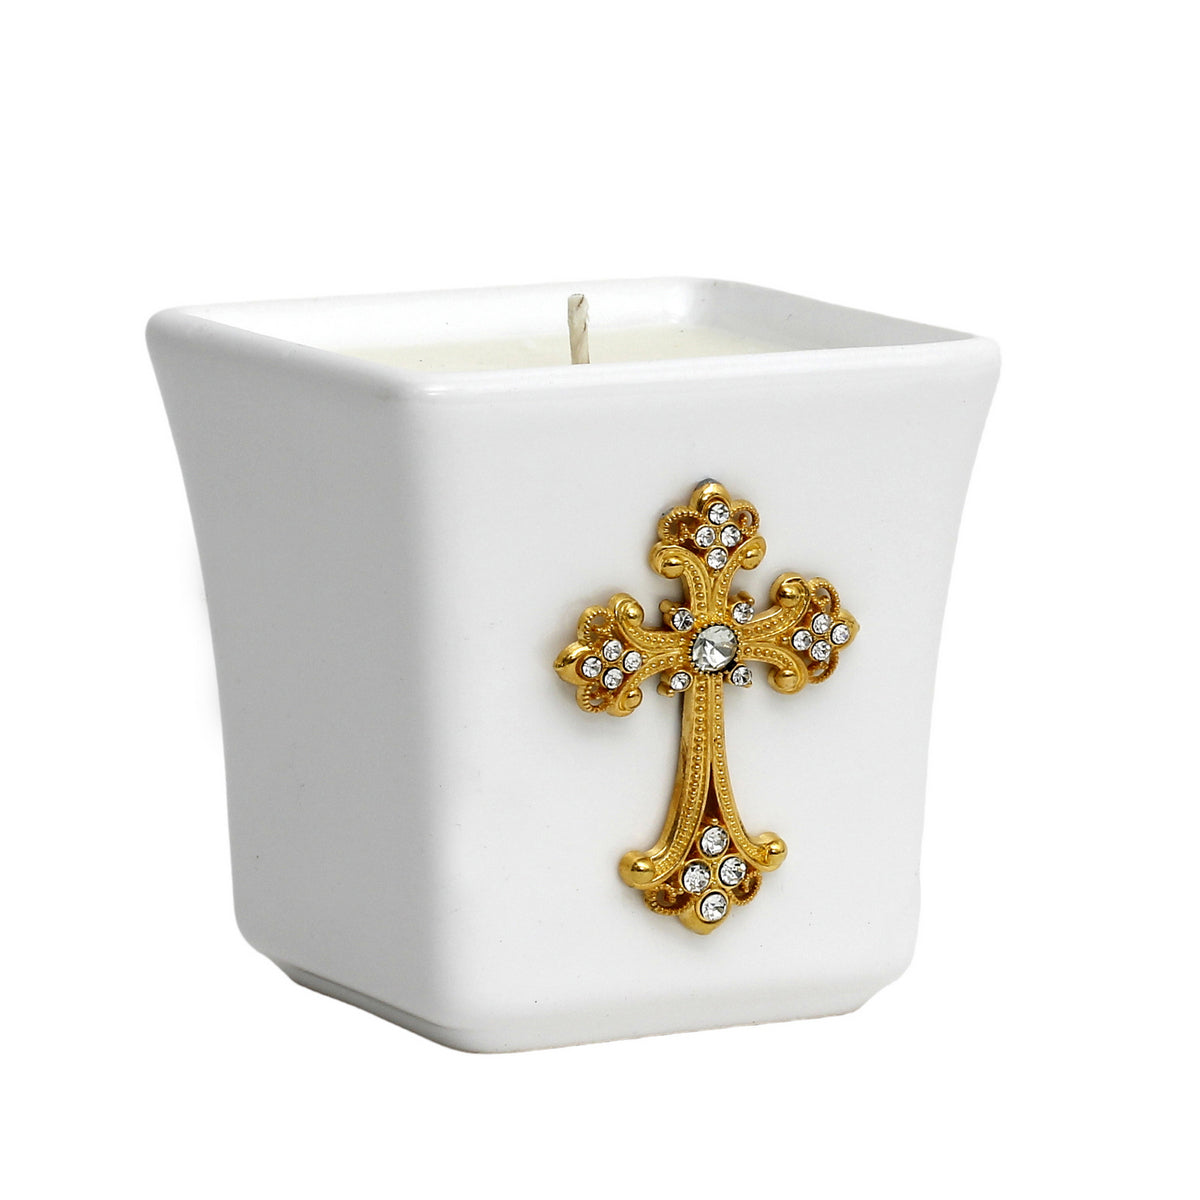 MONDIAL CANDLES: BIANCA Collection - Ceramic Square Container Candle with Gold Crucifix with Rhinestones - Artistica.com